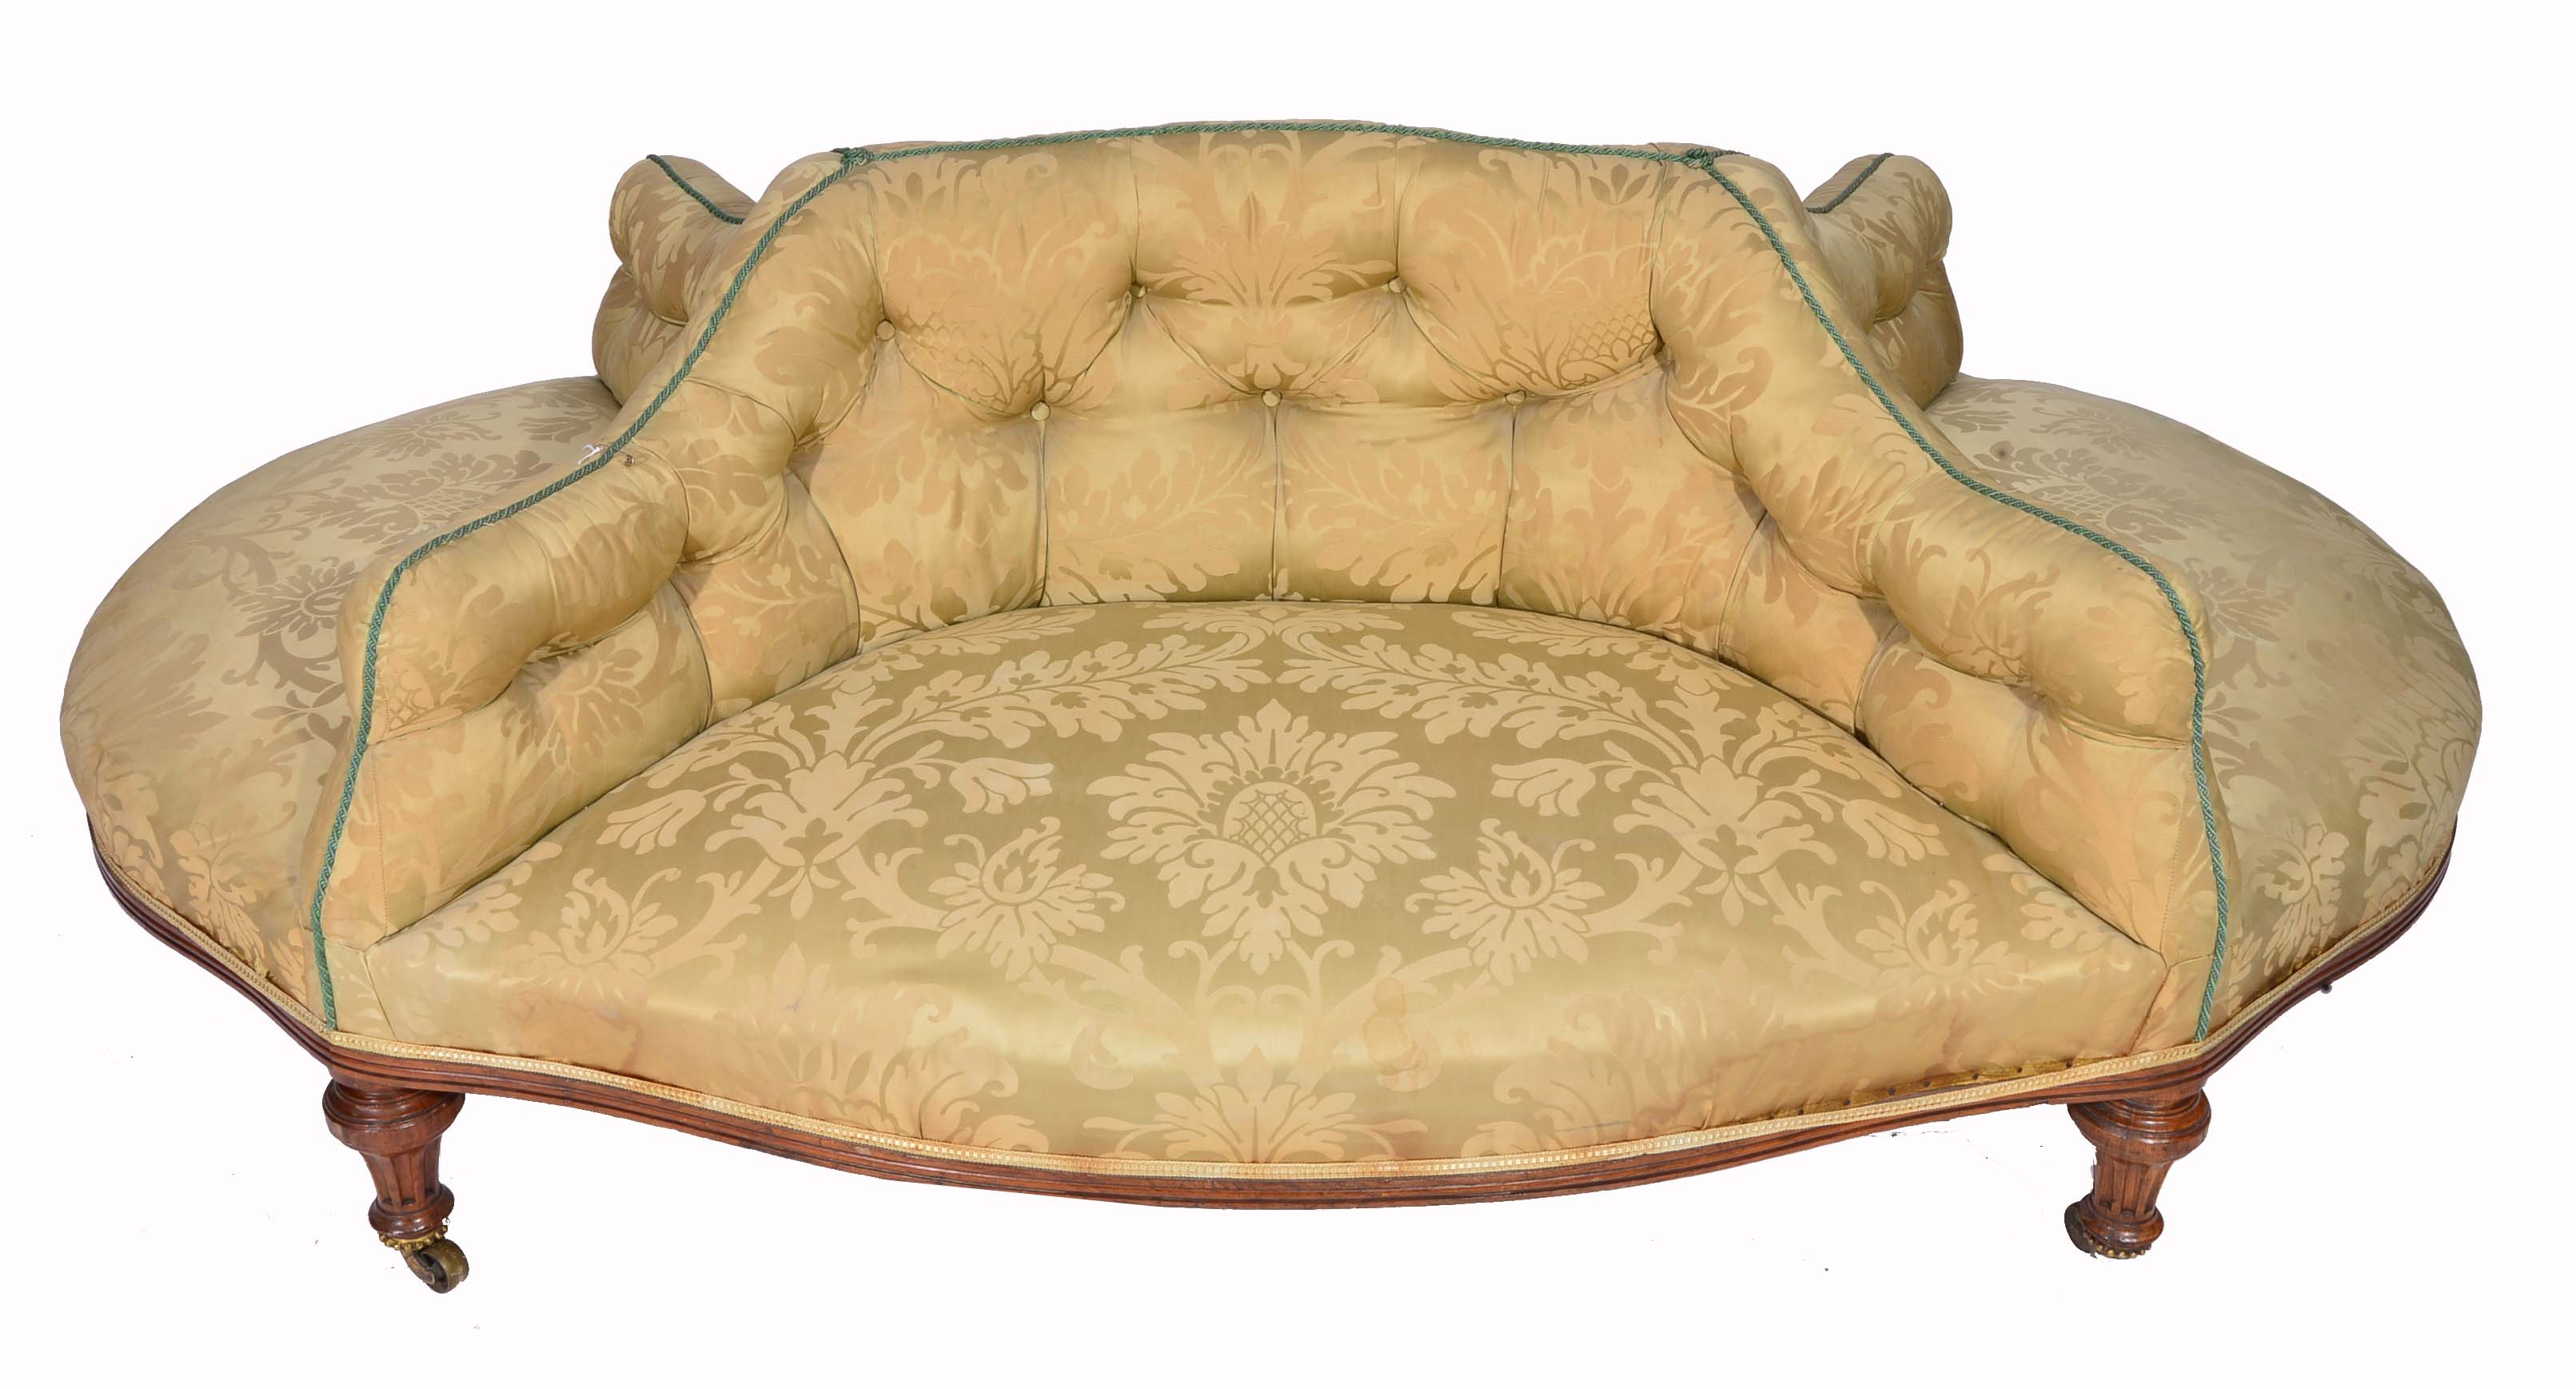 A HOLLAND & SONS WALNUT FRAMED FOUR SEATER CONVERSATION SEAT upholstered in pale green material and